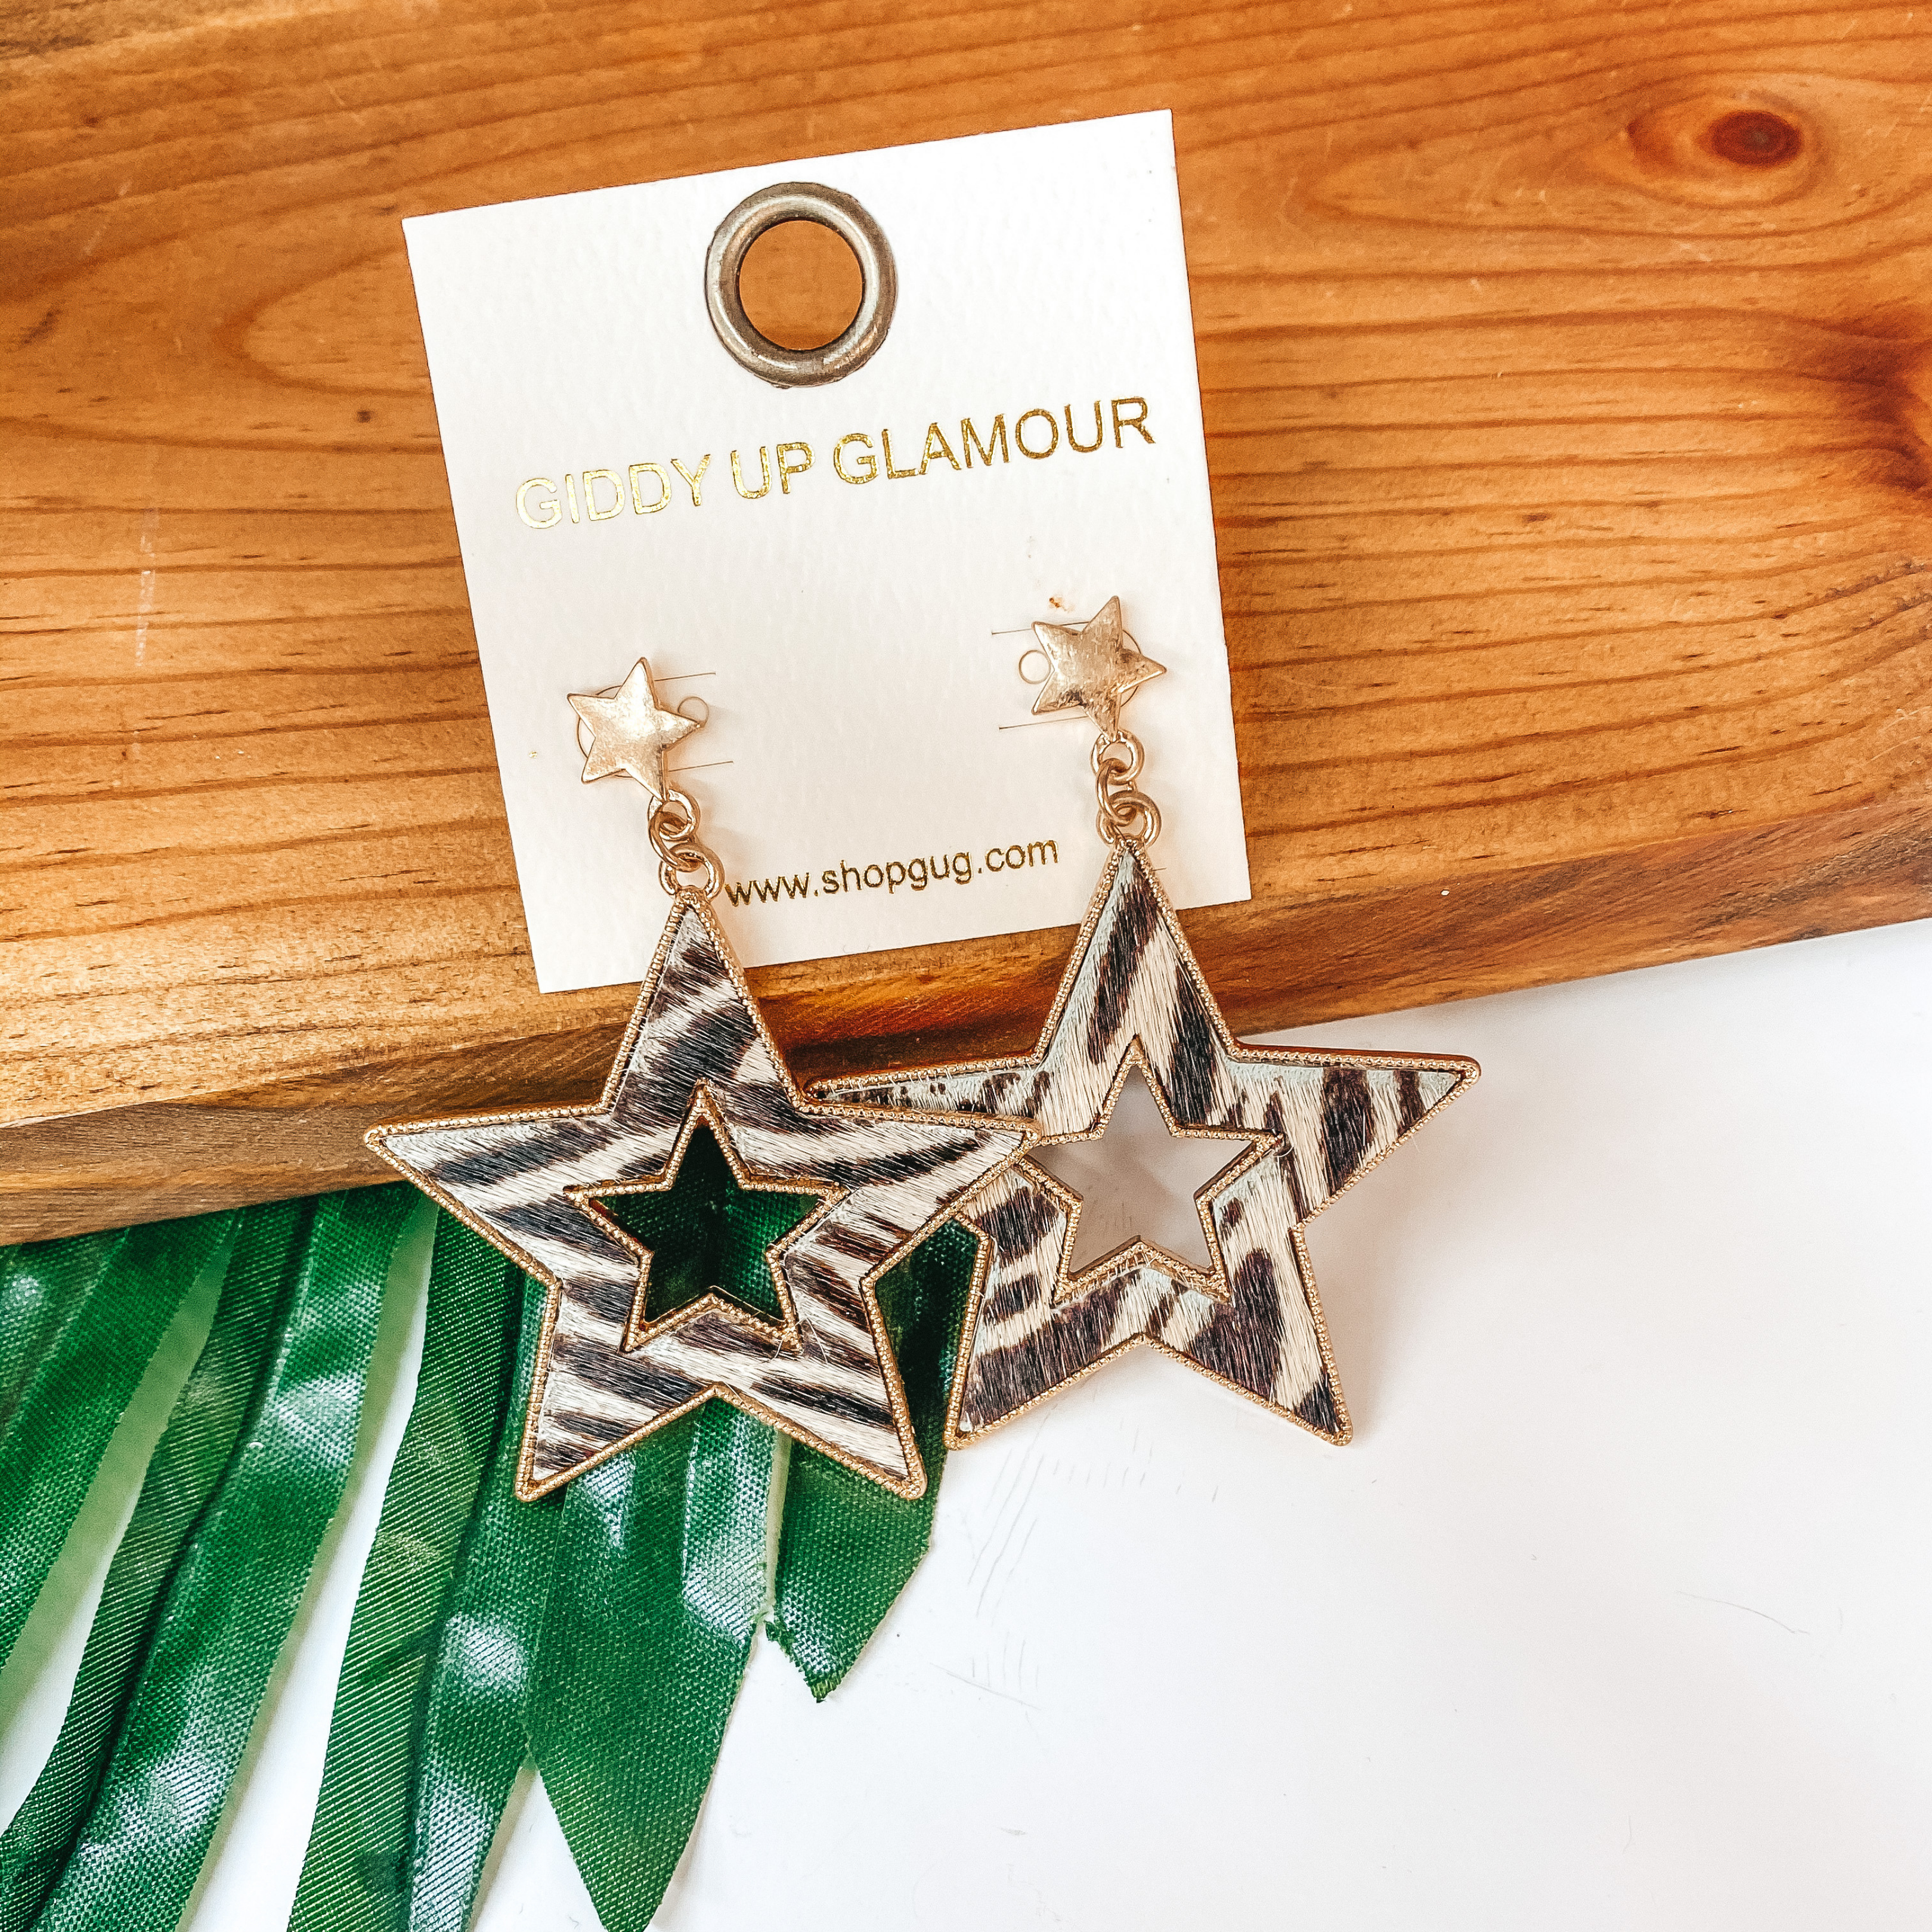 She's a Star Gold Post Dangle Earrings with Faux Fur Star in Zebra Print - Giddy Up Glamour Boutique